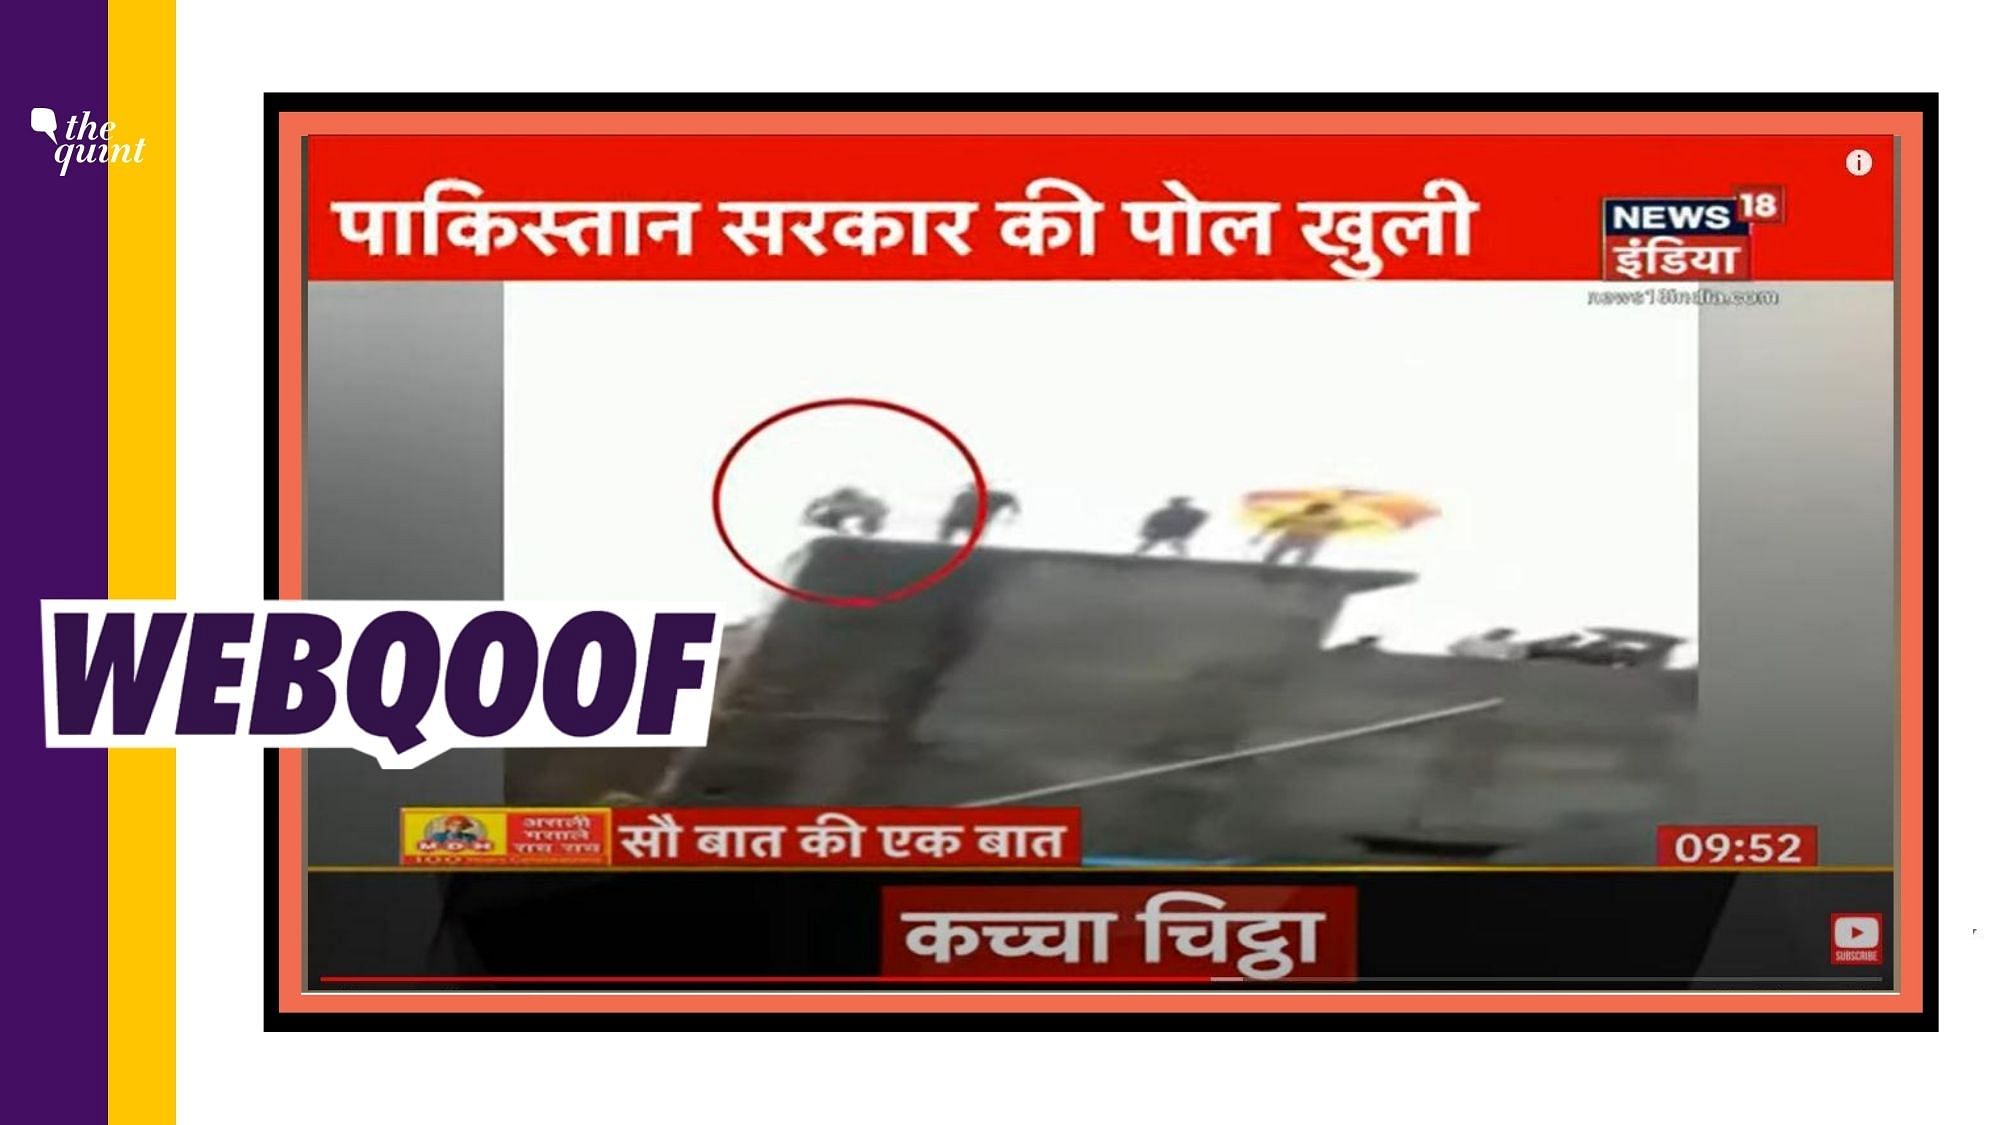 Hindi news channel – News18 India – aired a video showing a man jumping into floodwater in Madhya Pradesh’s Indore as that from Karachi in Pakistan.